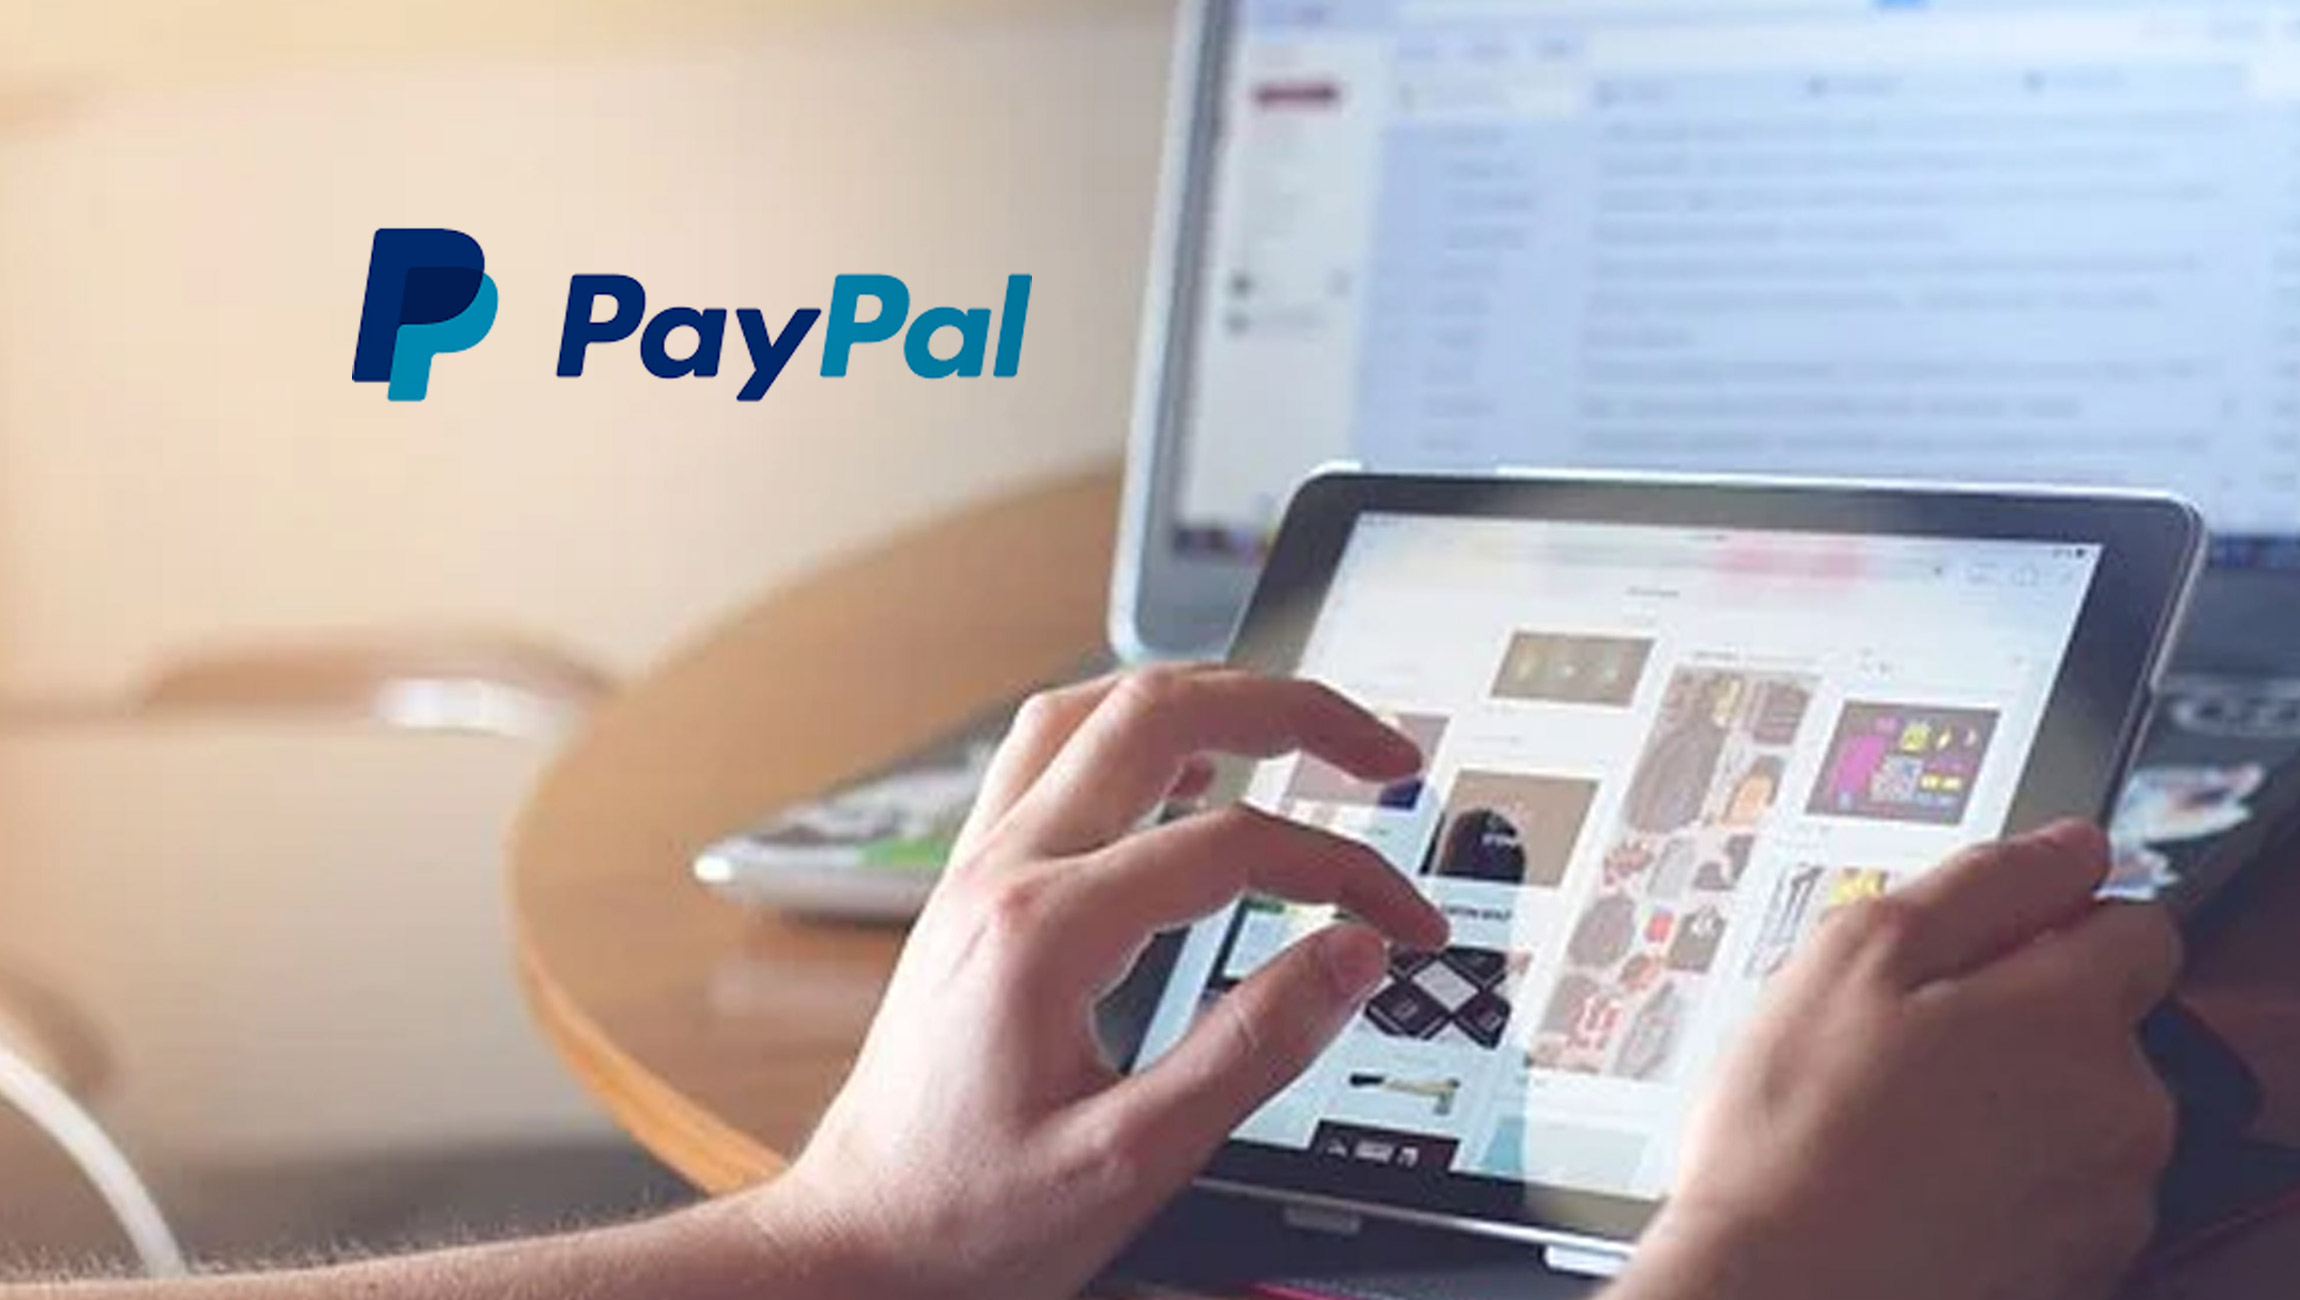 PayPal Launches its All-In-One POS Solution for Small Businesses in the U.S.